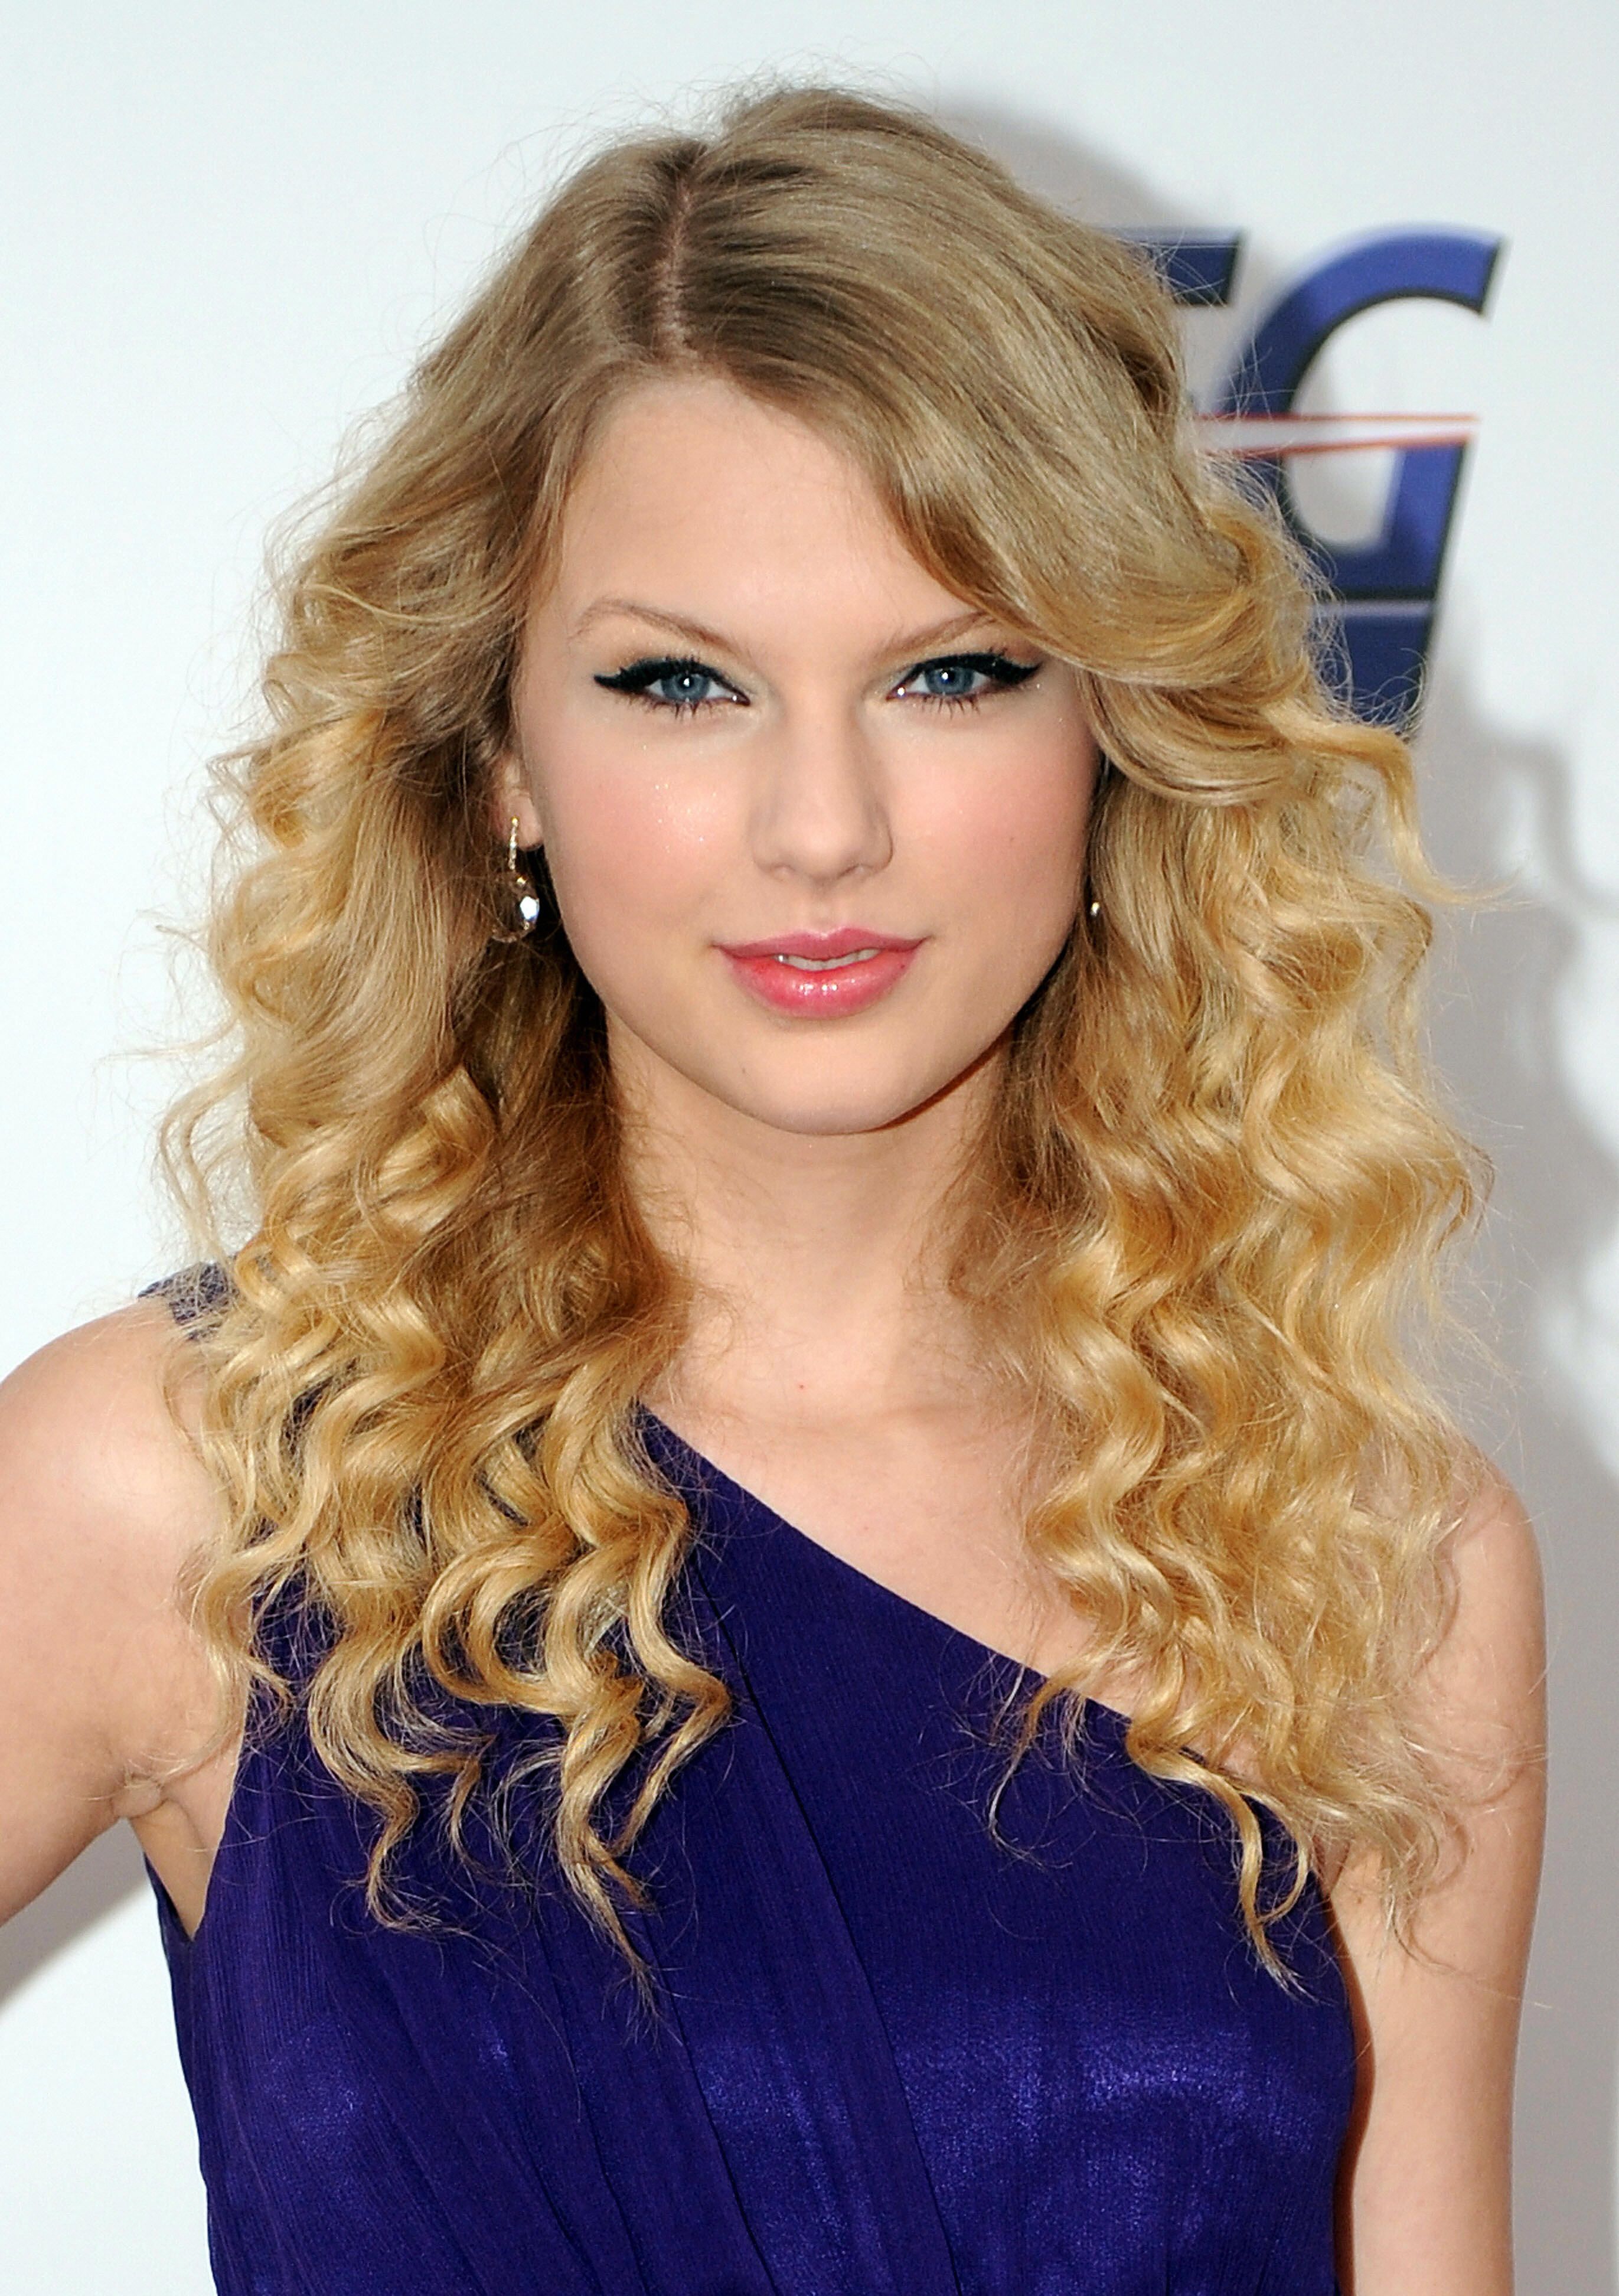 Taylor Swift 1940s hairstyle by itstak on DeviantArt